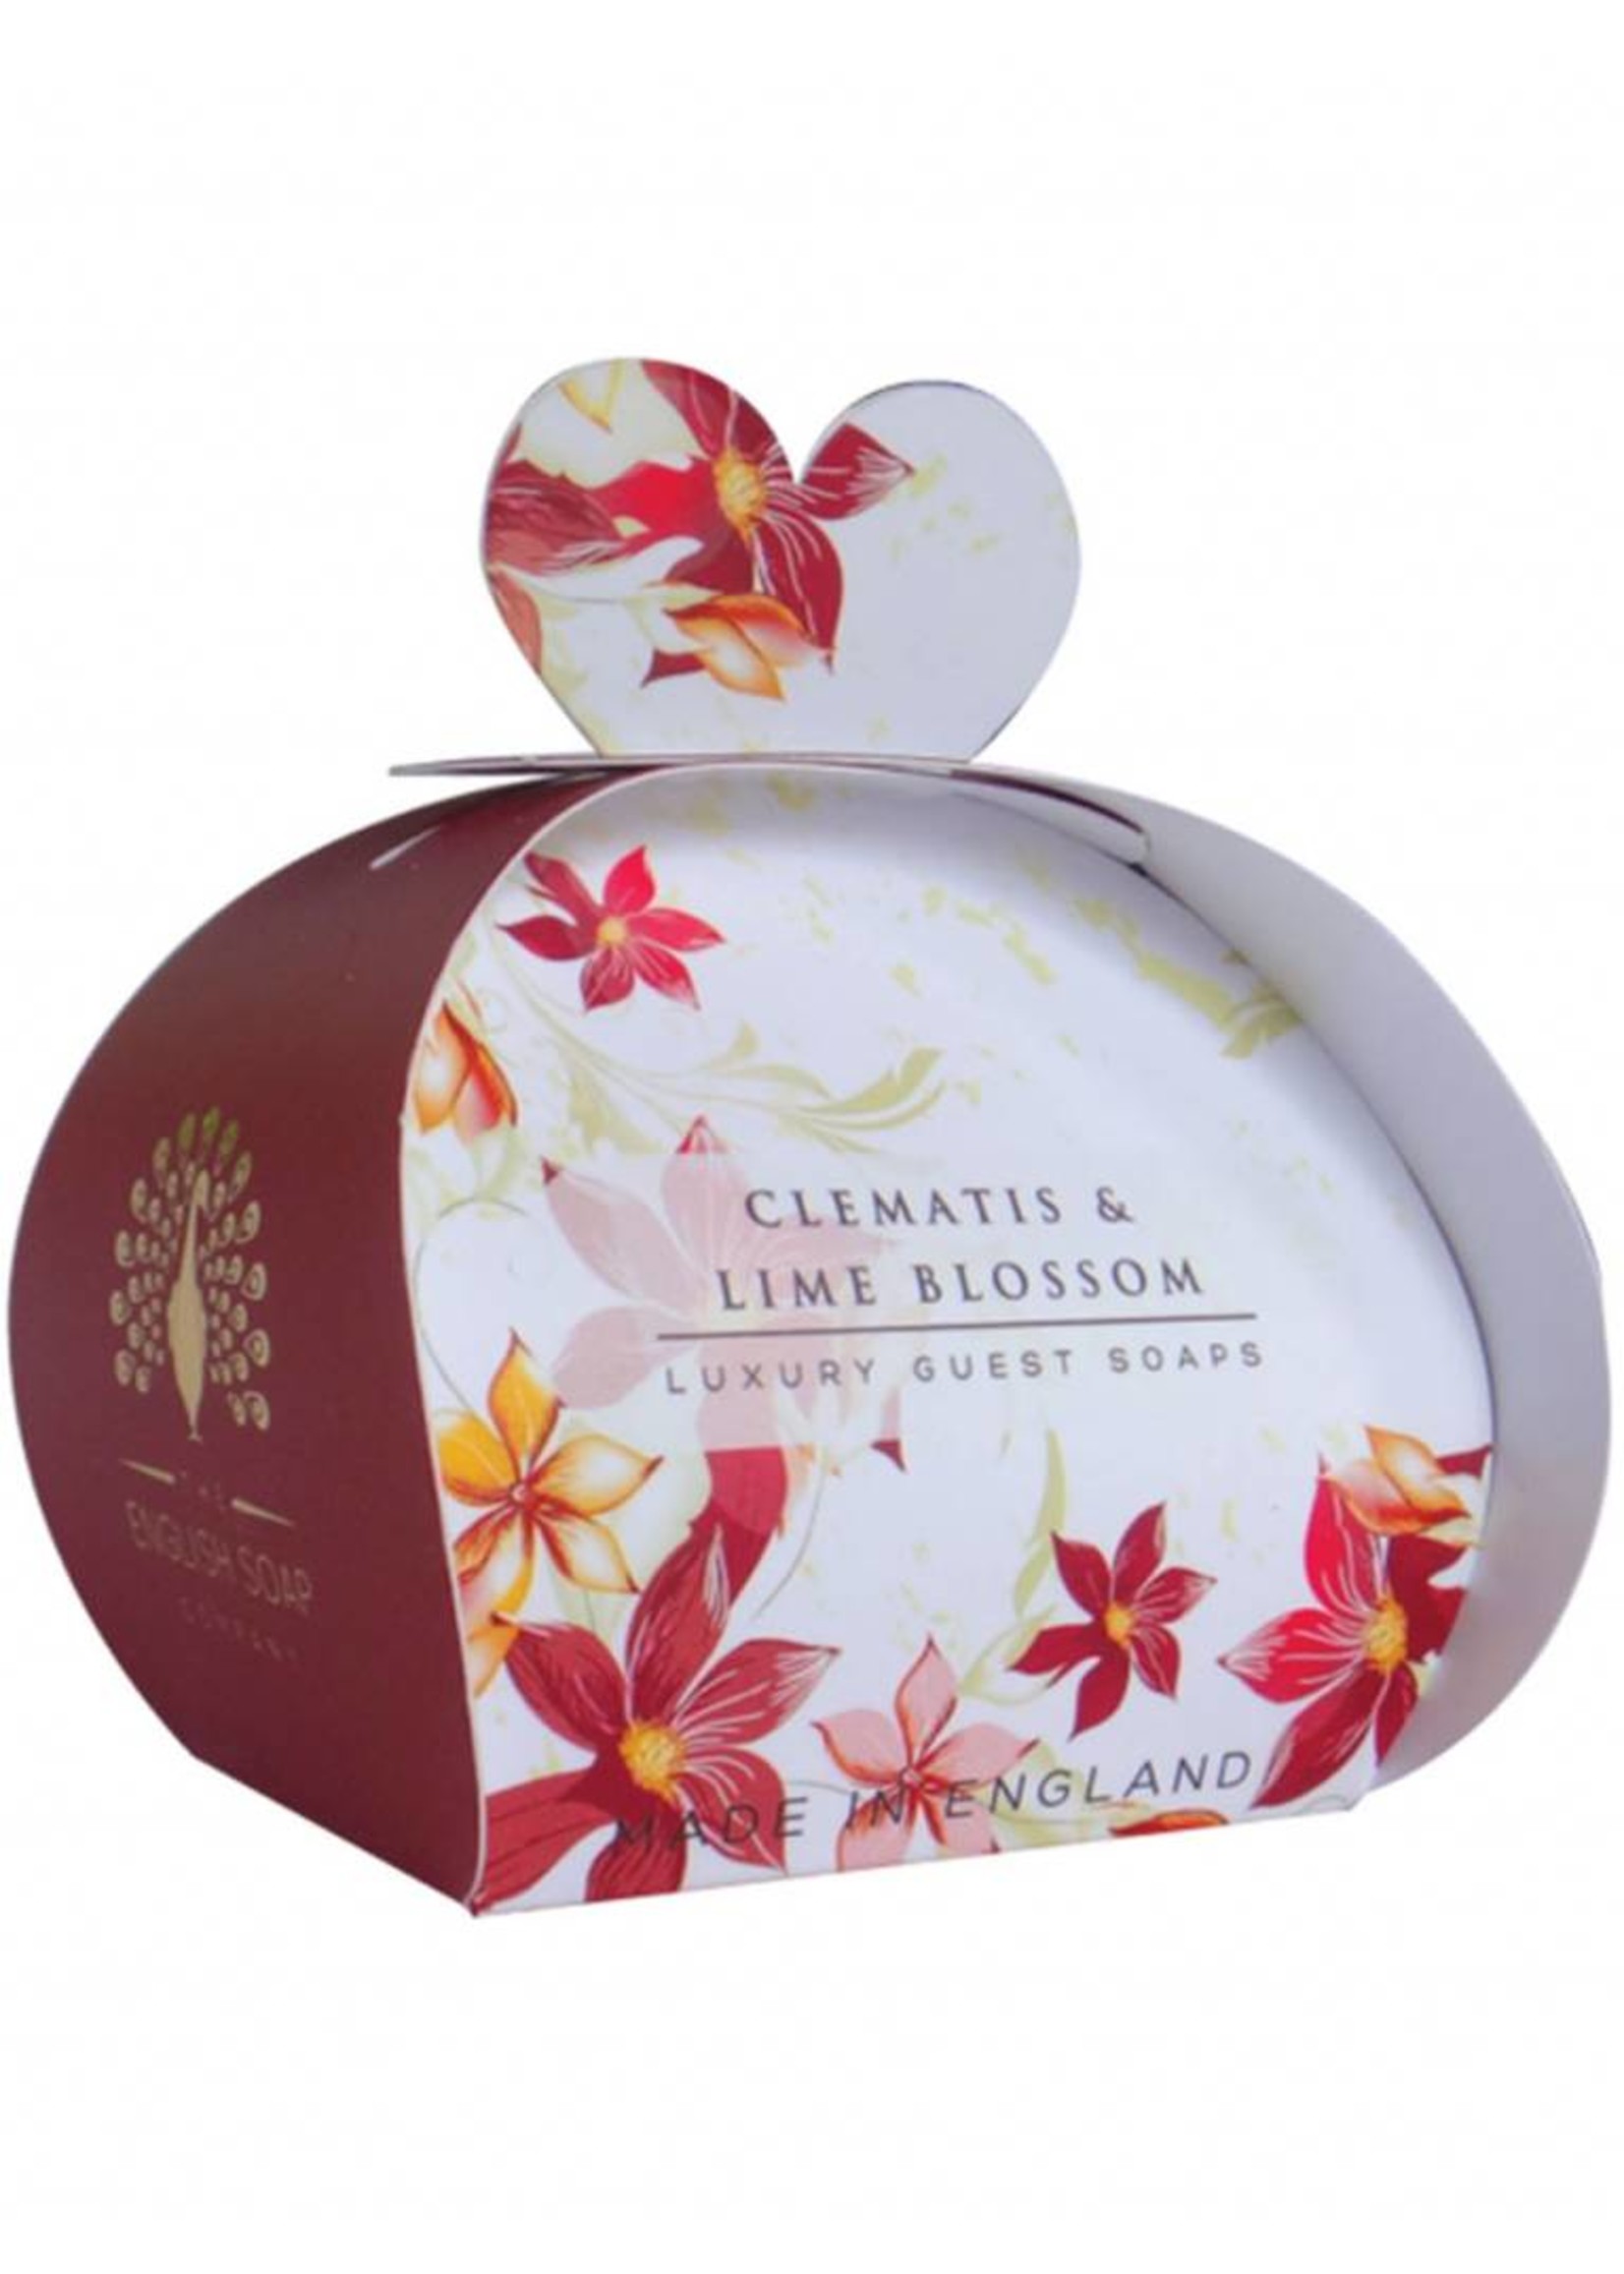 The English Soap Company Clematis & Lime Blossom